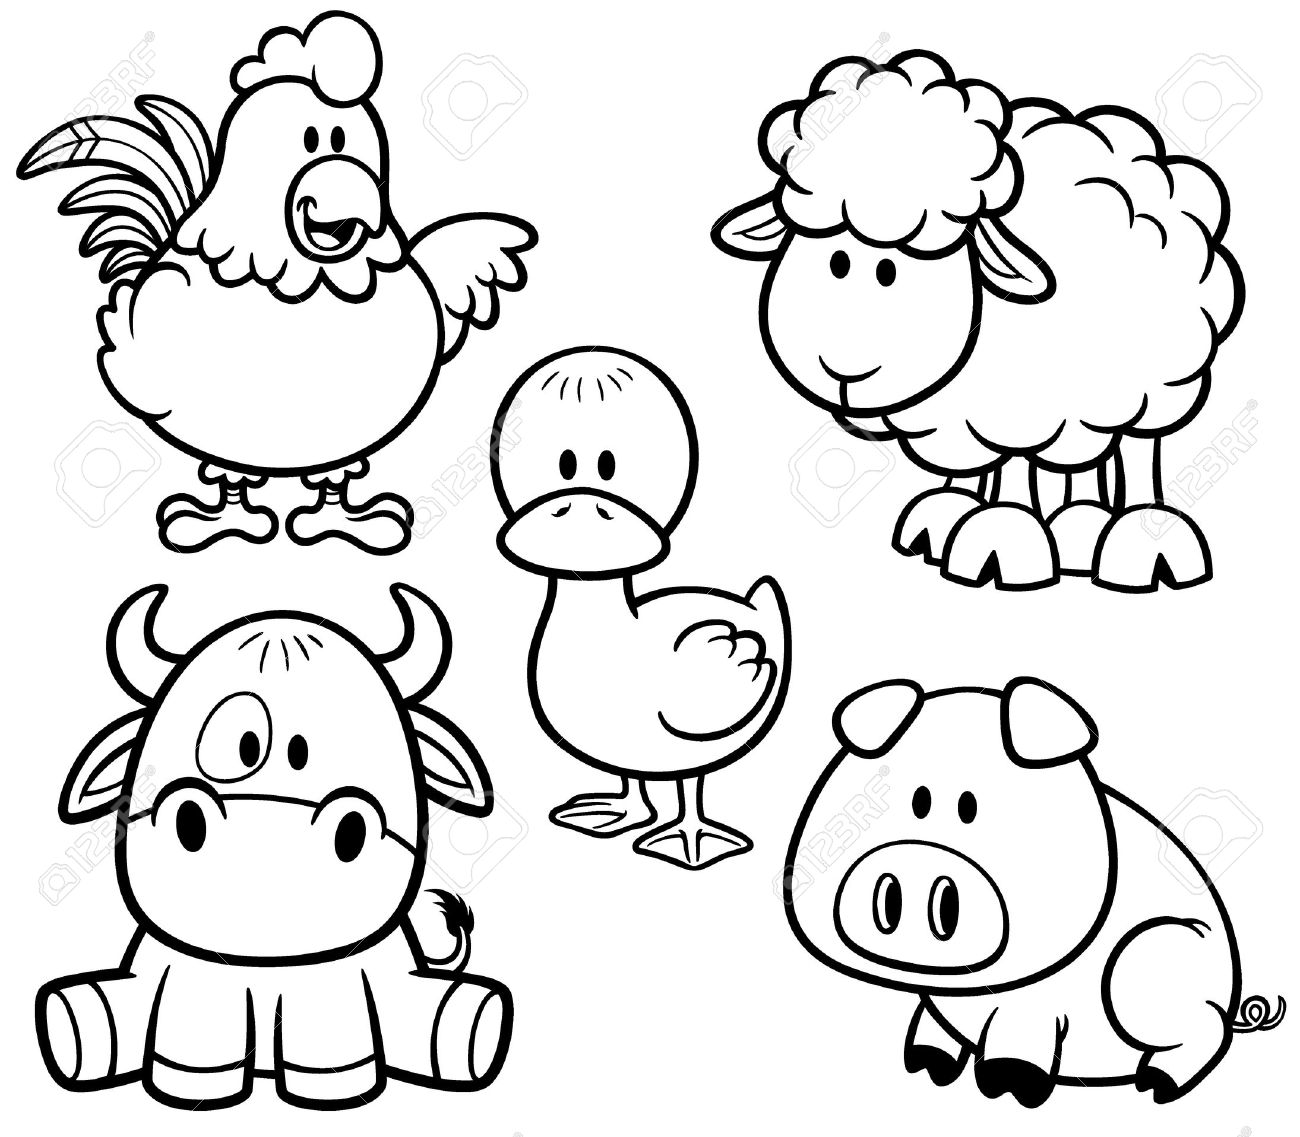 Cute Baby Farm Animal Coloring Pages ~ Best Coloring Pages For Kids